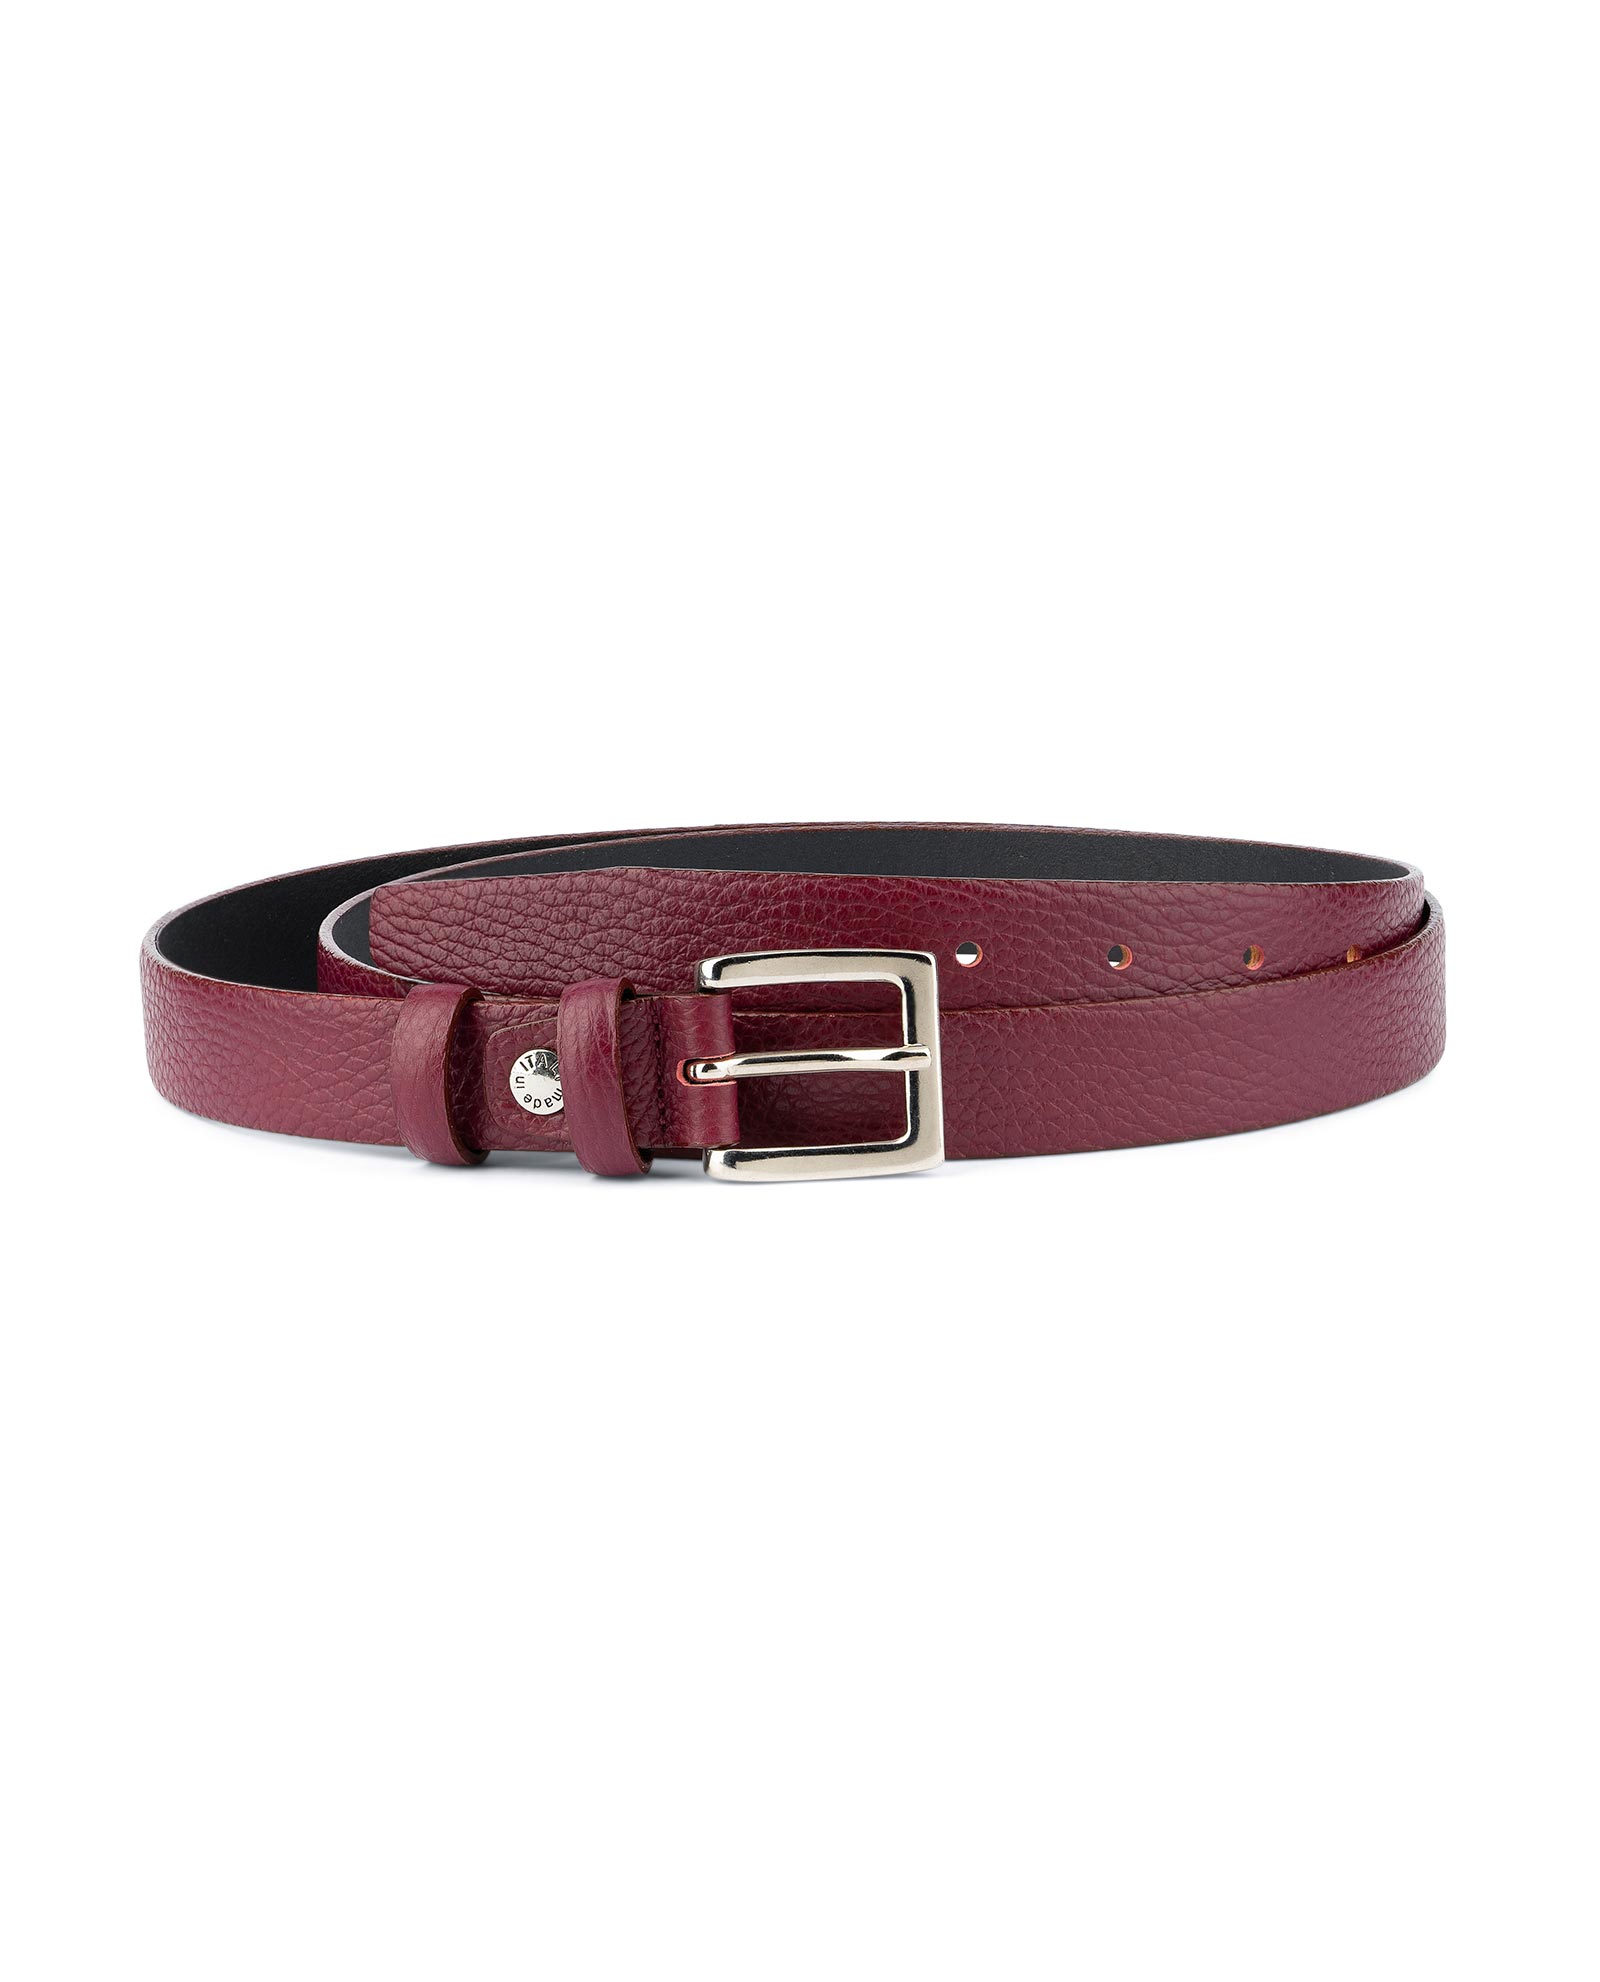 WOMEN FASHION Accessories Belt Red discount 81% NoName Fine burgundy belt with studs Red S 